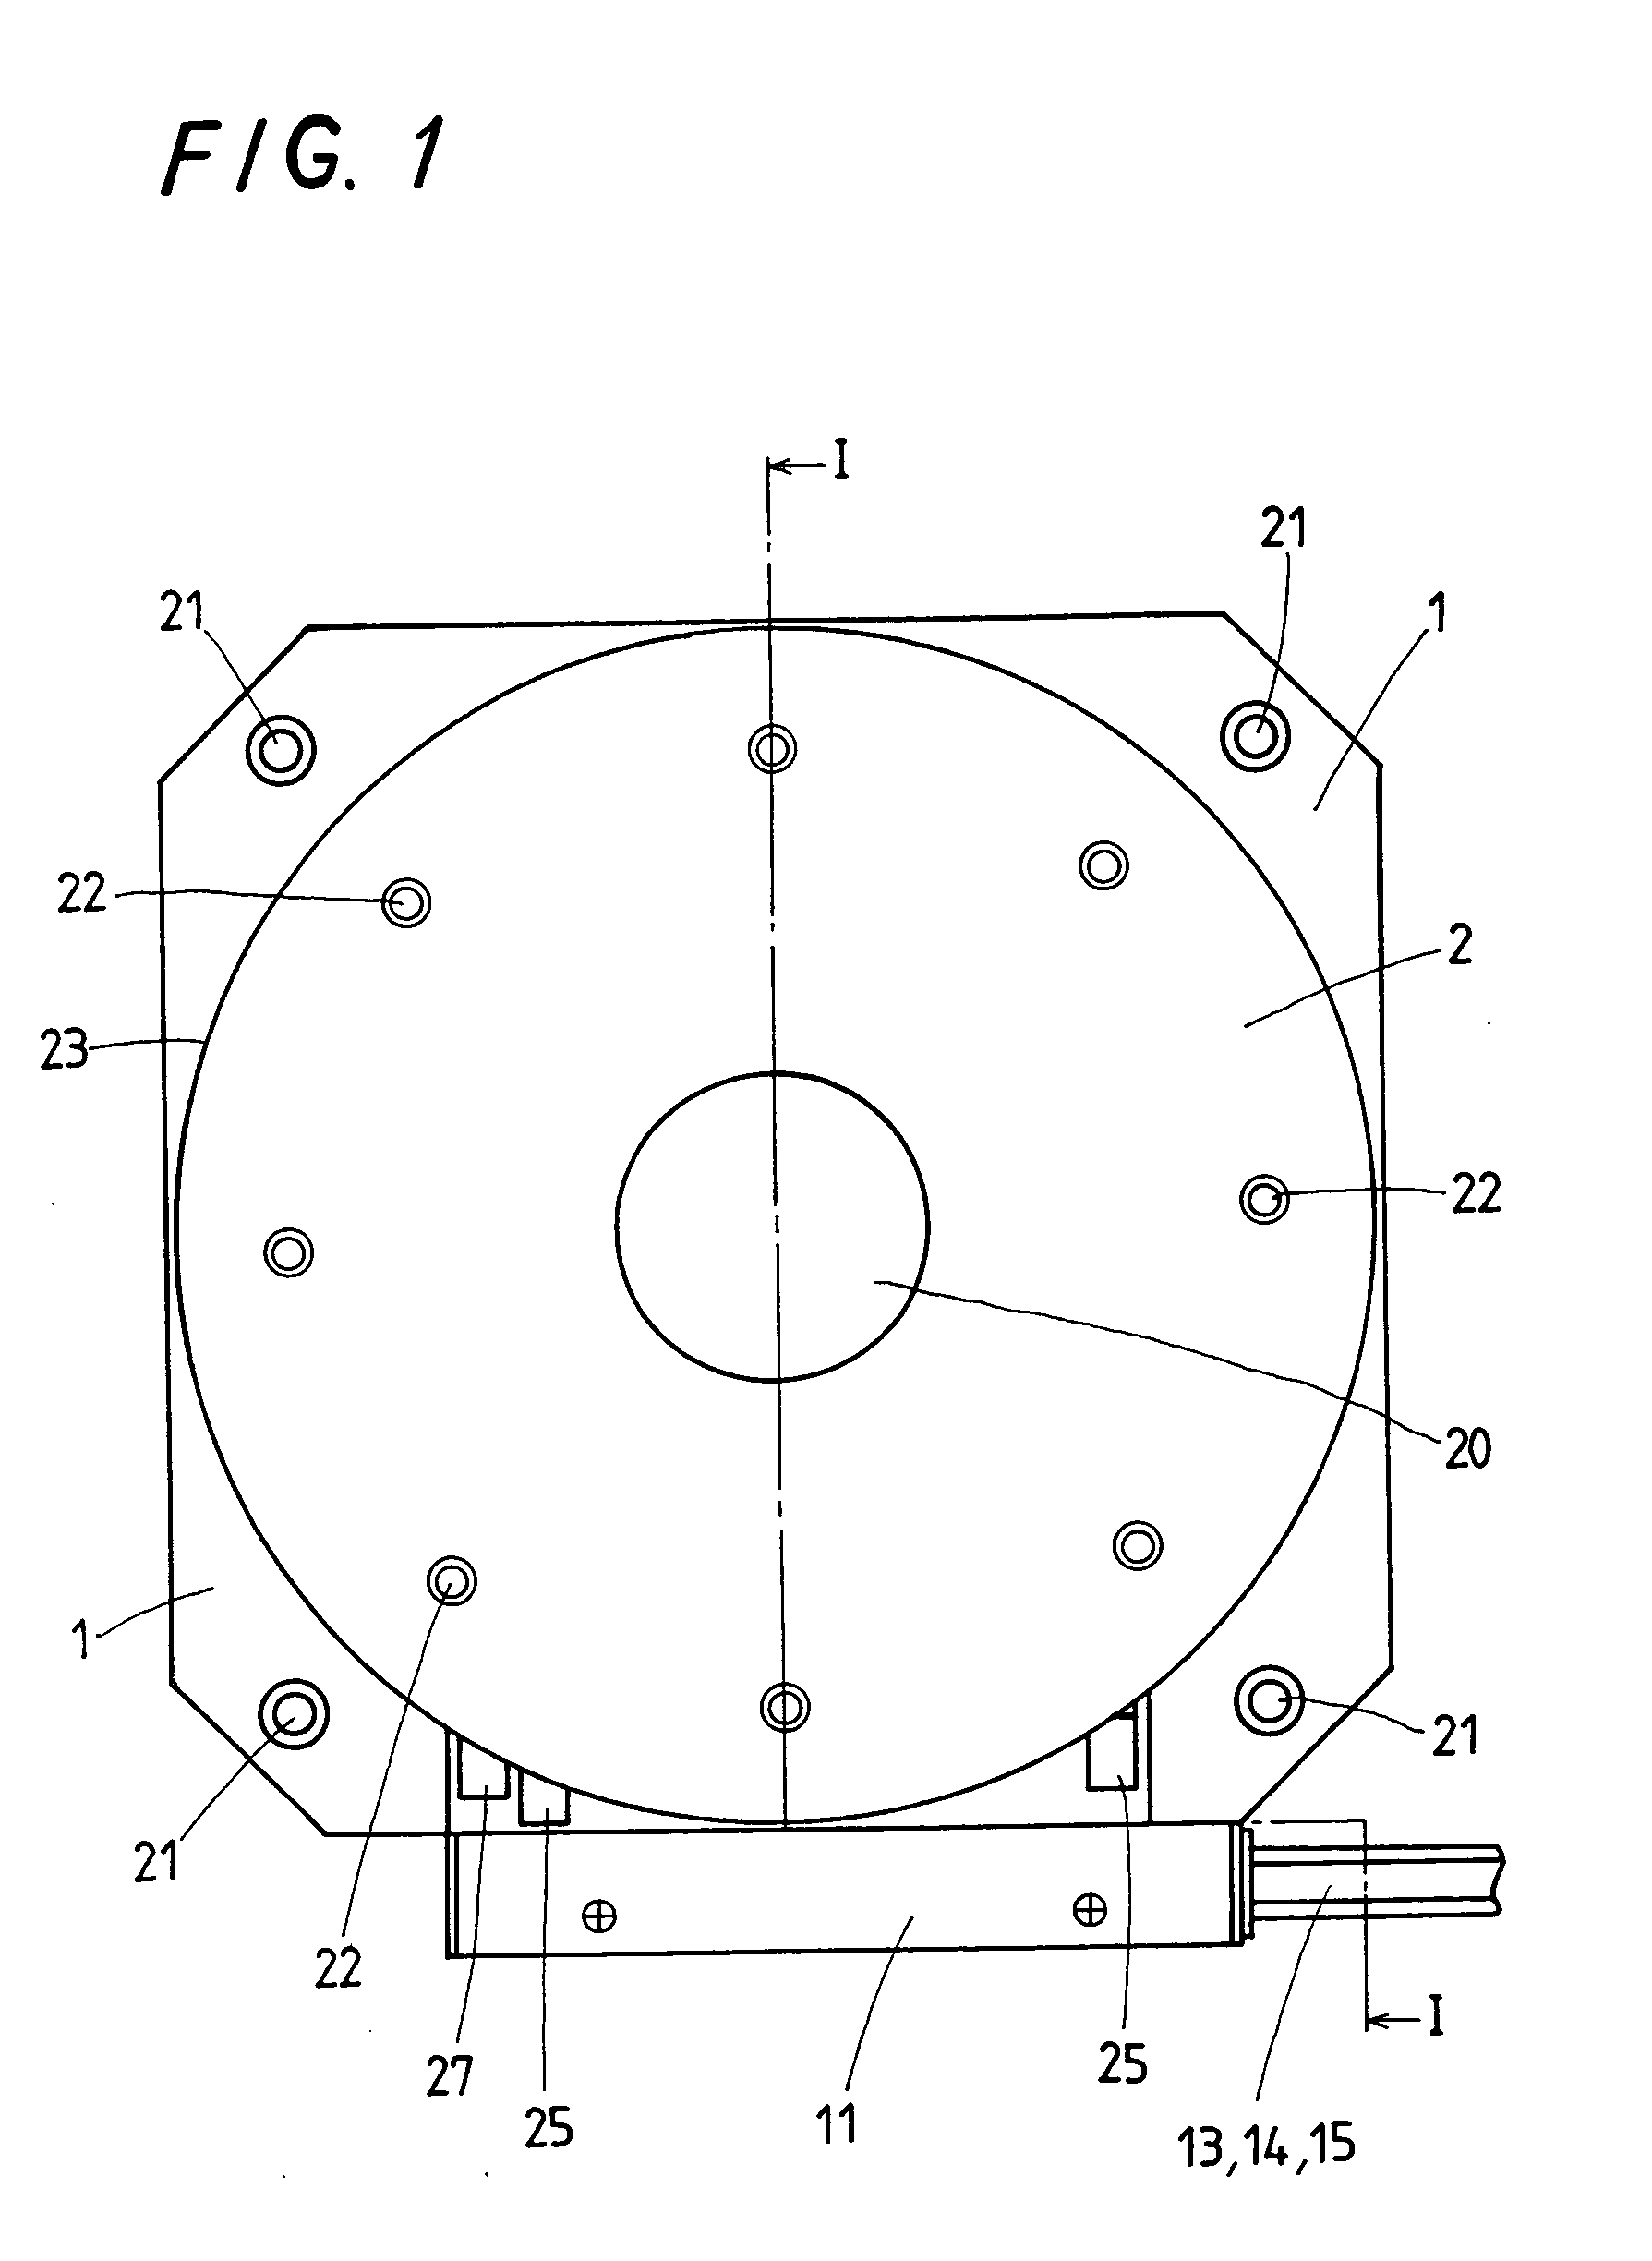 Position-control stage with onboard linear motor